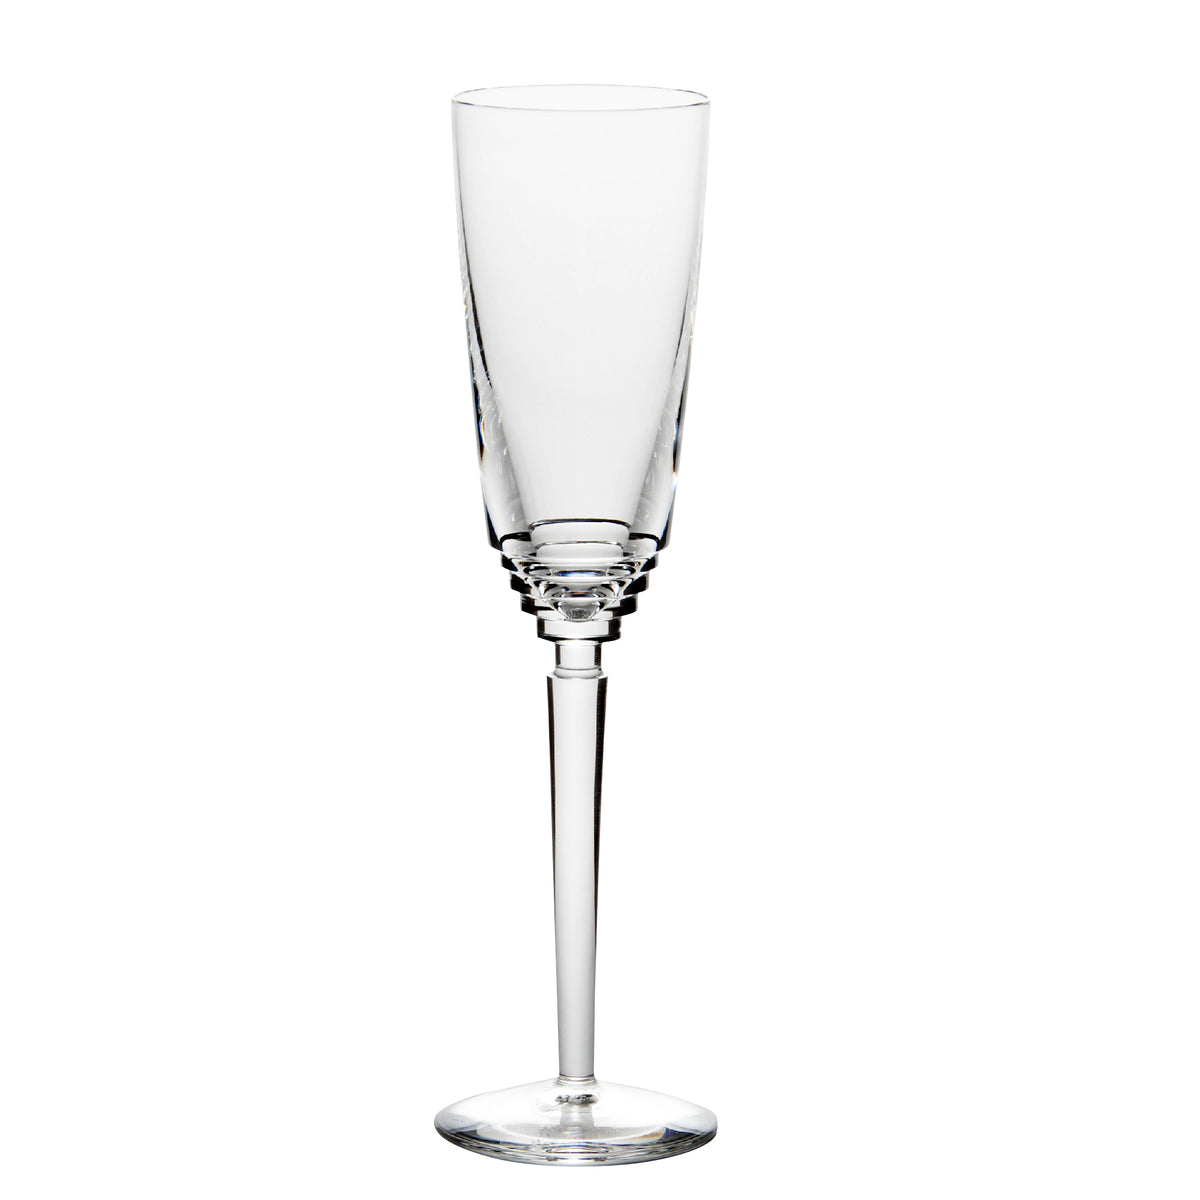 Oxymore Crystal Champagne Flute